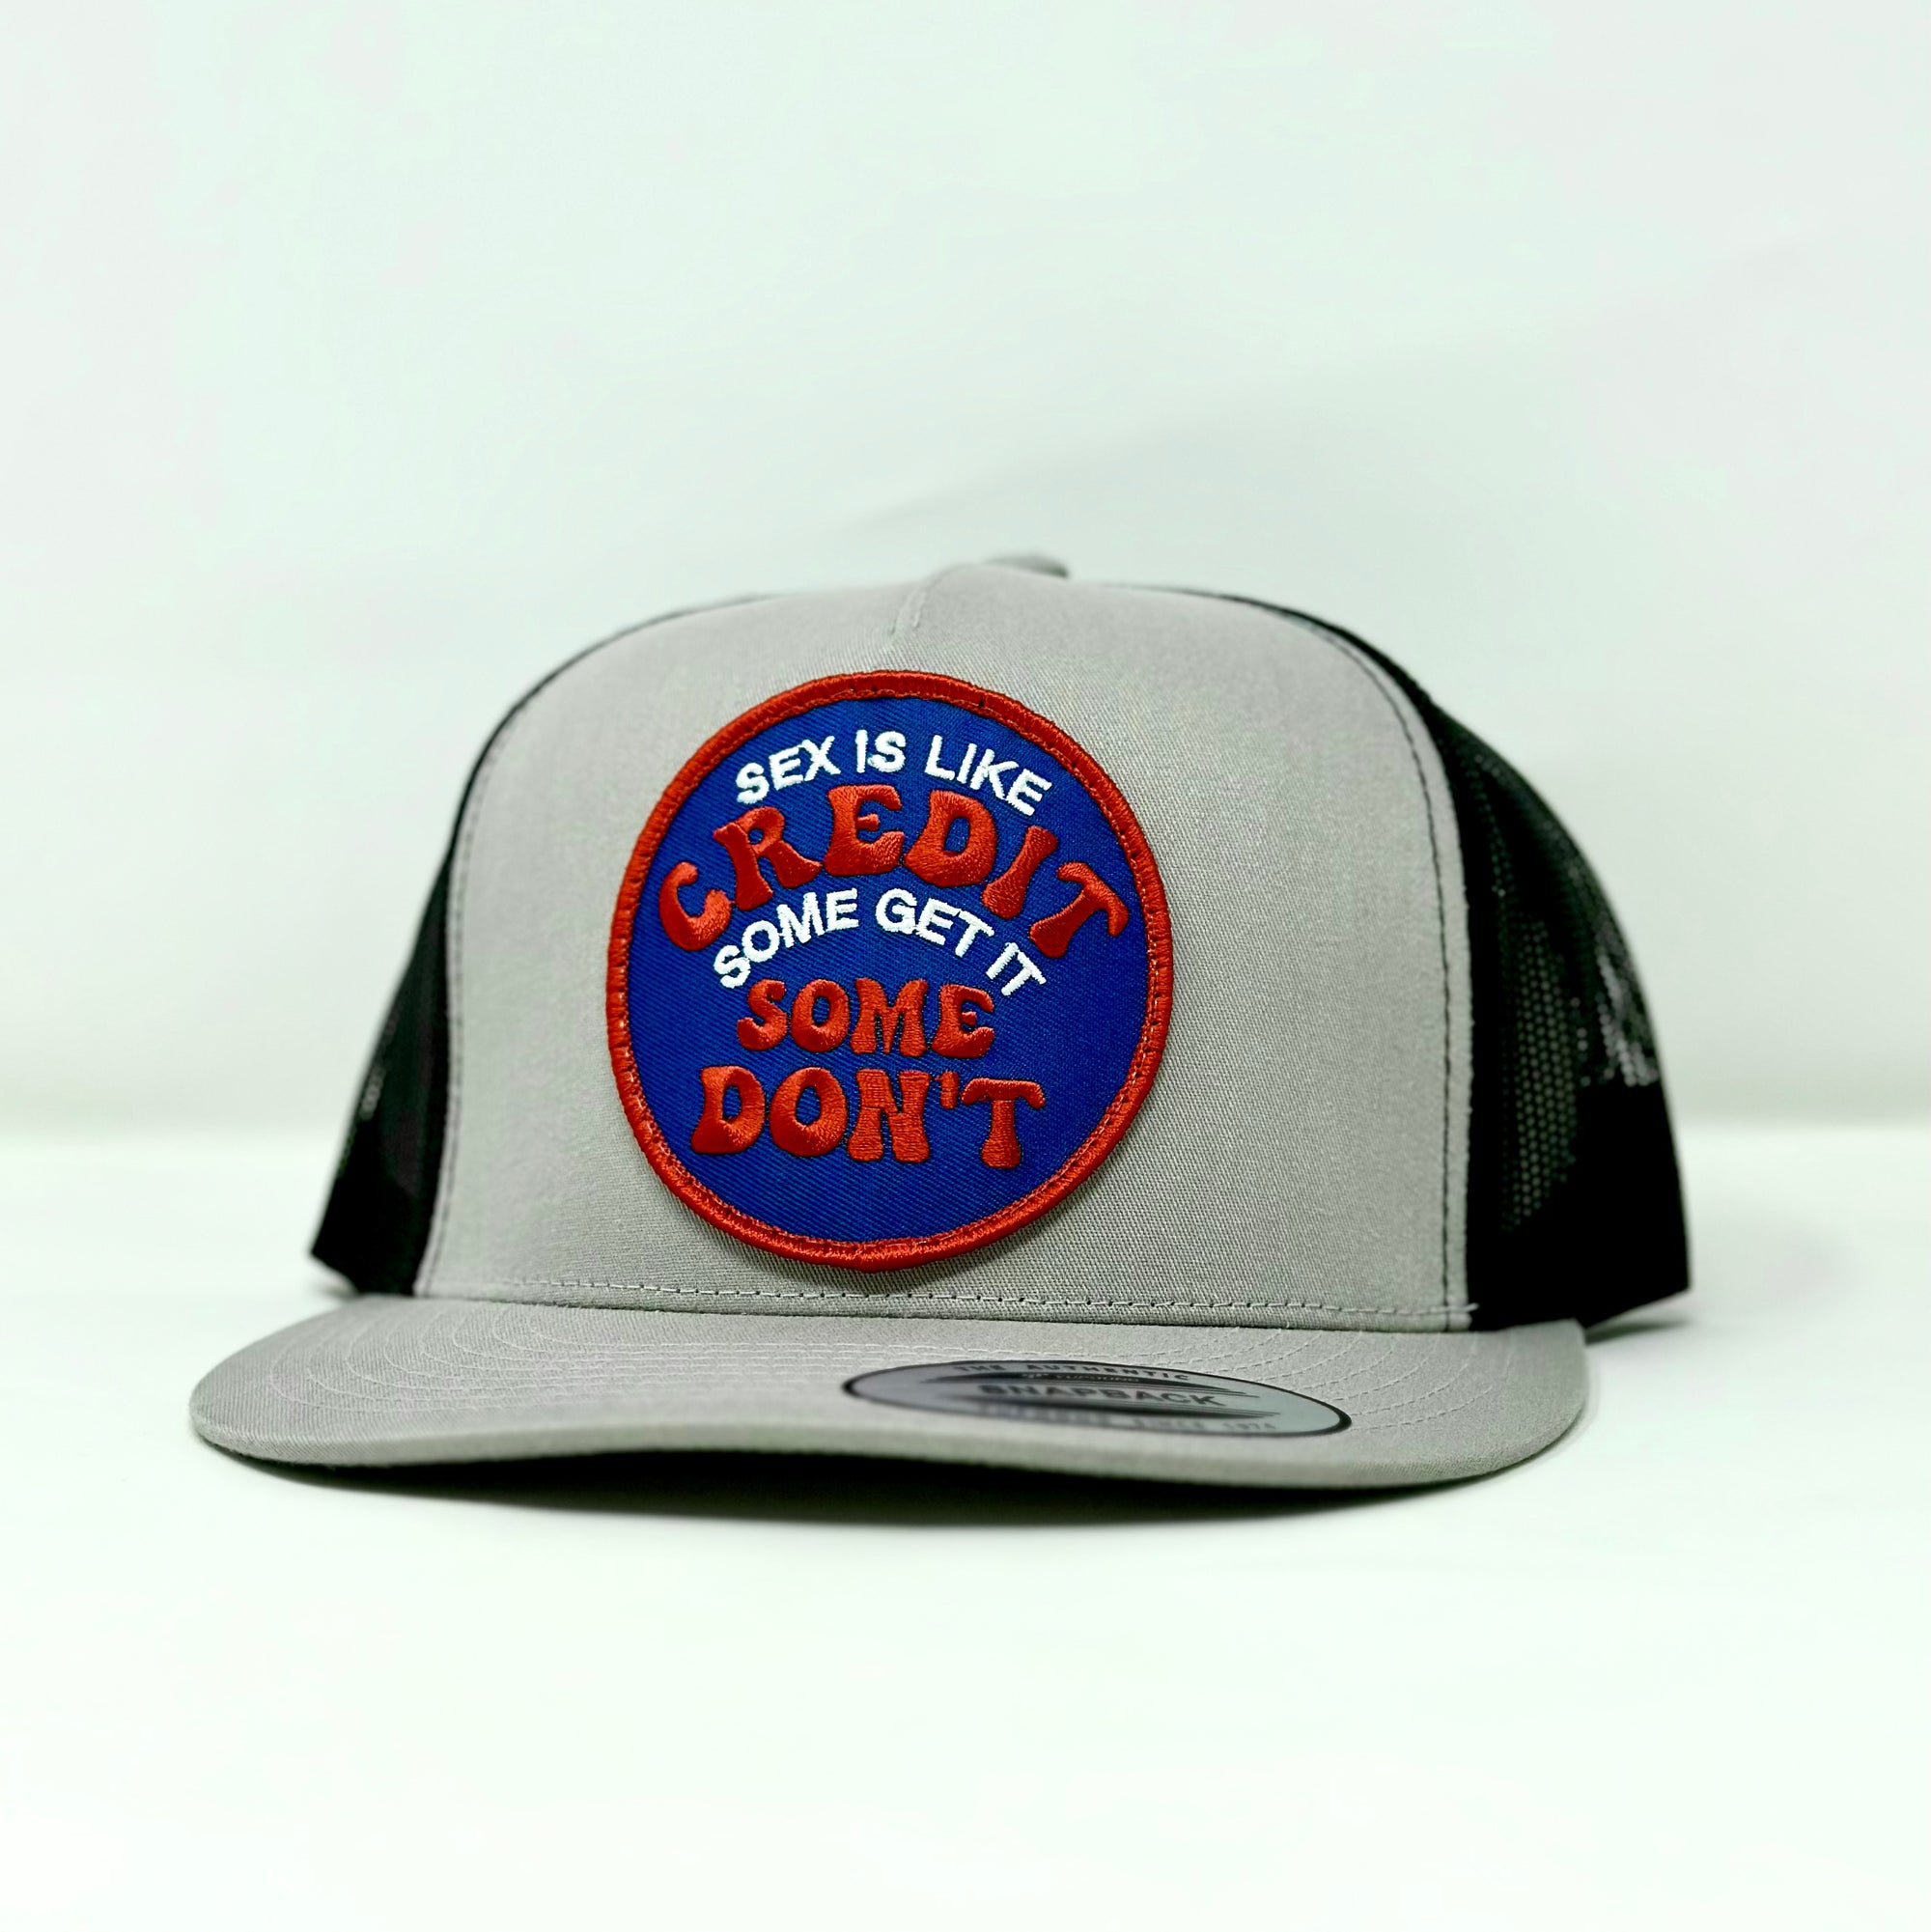 Quickship - Sex is like credit some get it some don't - 6006 Grey/Black Yupoong